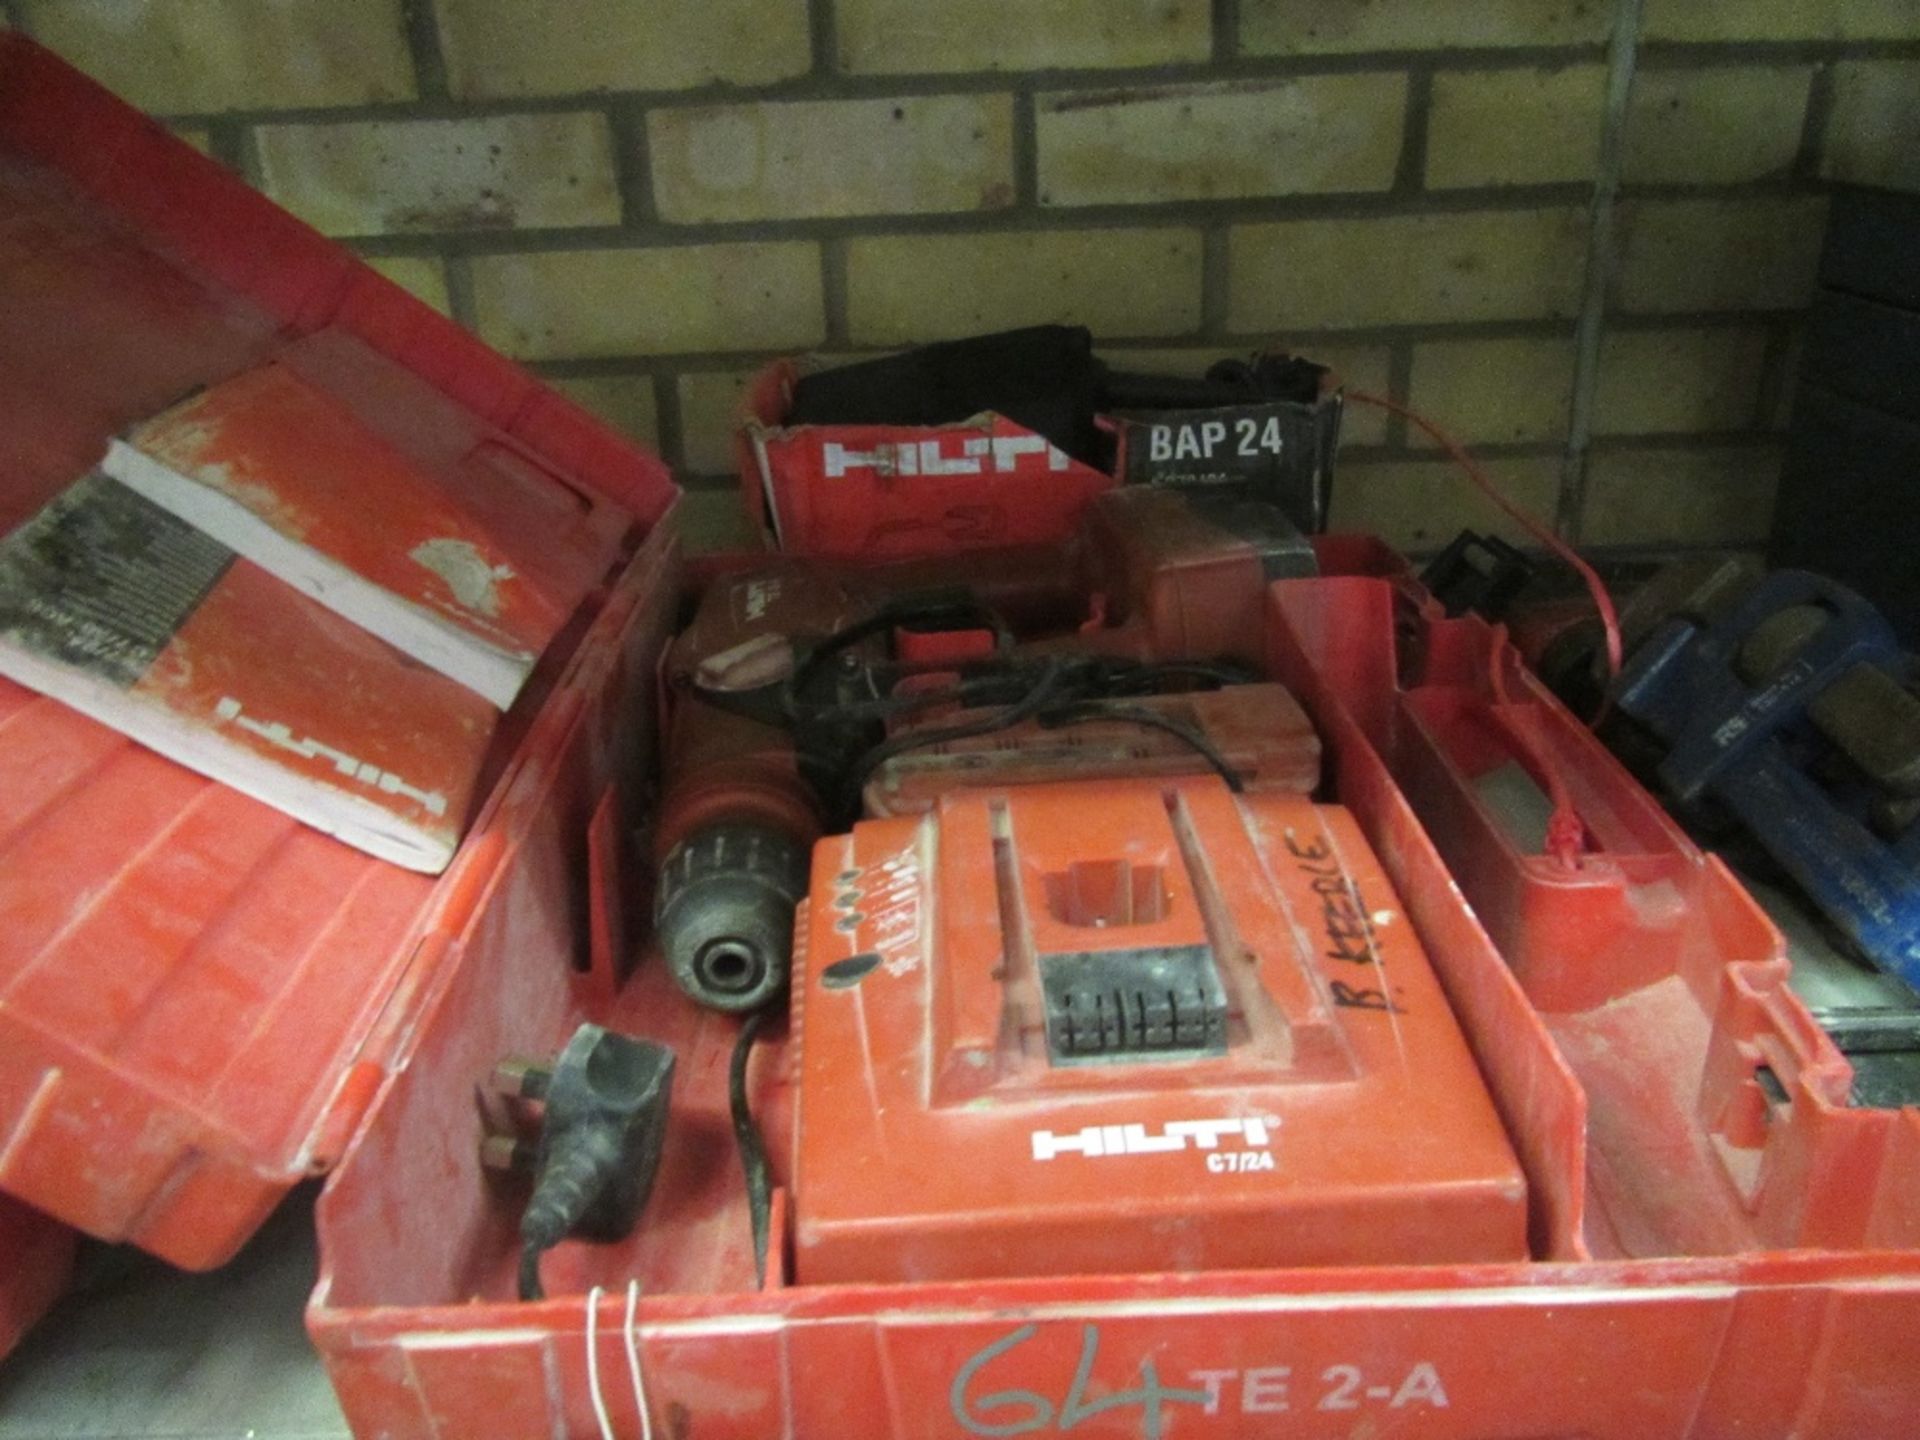 Hilti TE2-A Cordless Drill with BAP 24 Charger UNRESERVED LOT